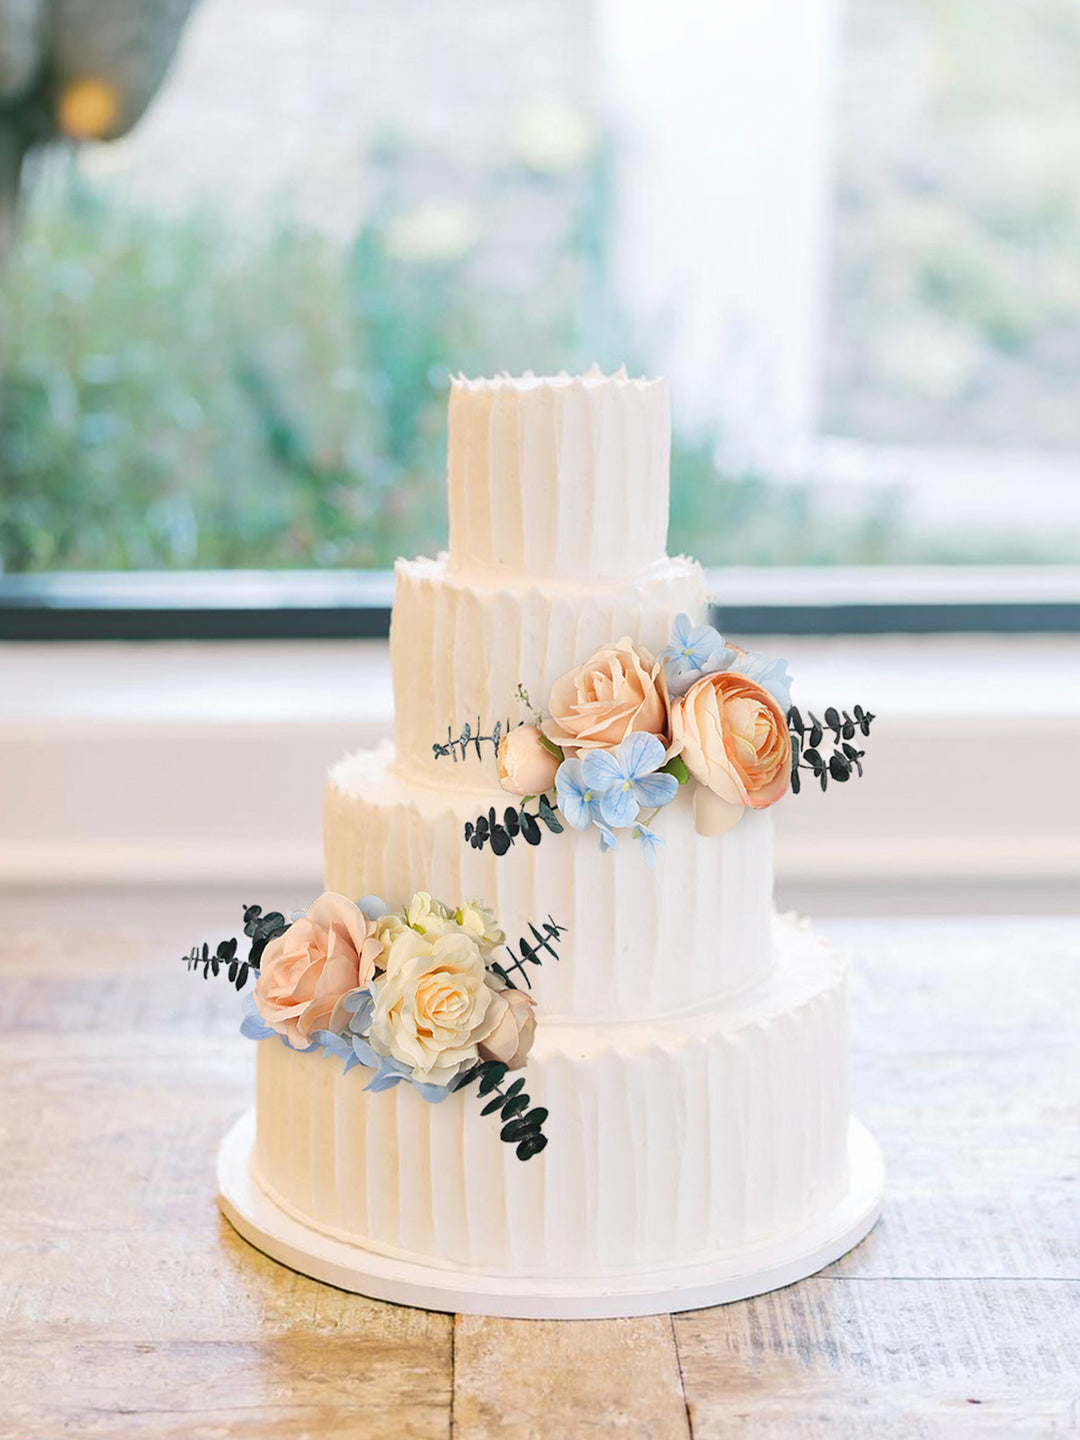 Choosing Between Artificial and Real Flowers for Cake Decor: What You Need to Know - Rinlong Flower